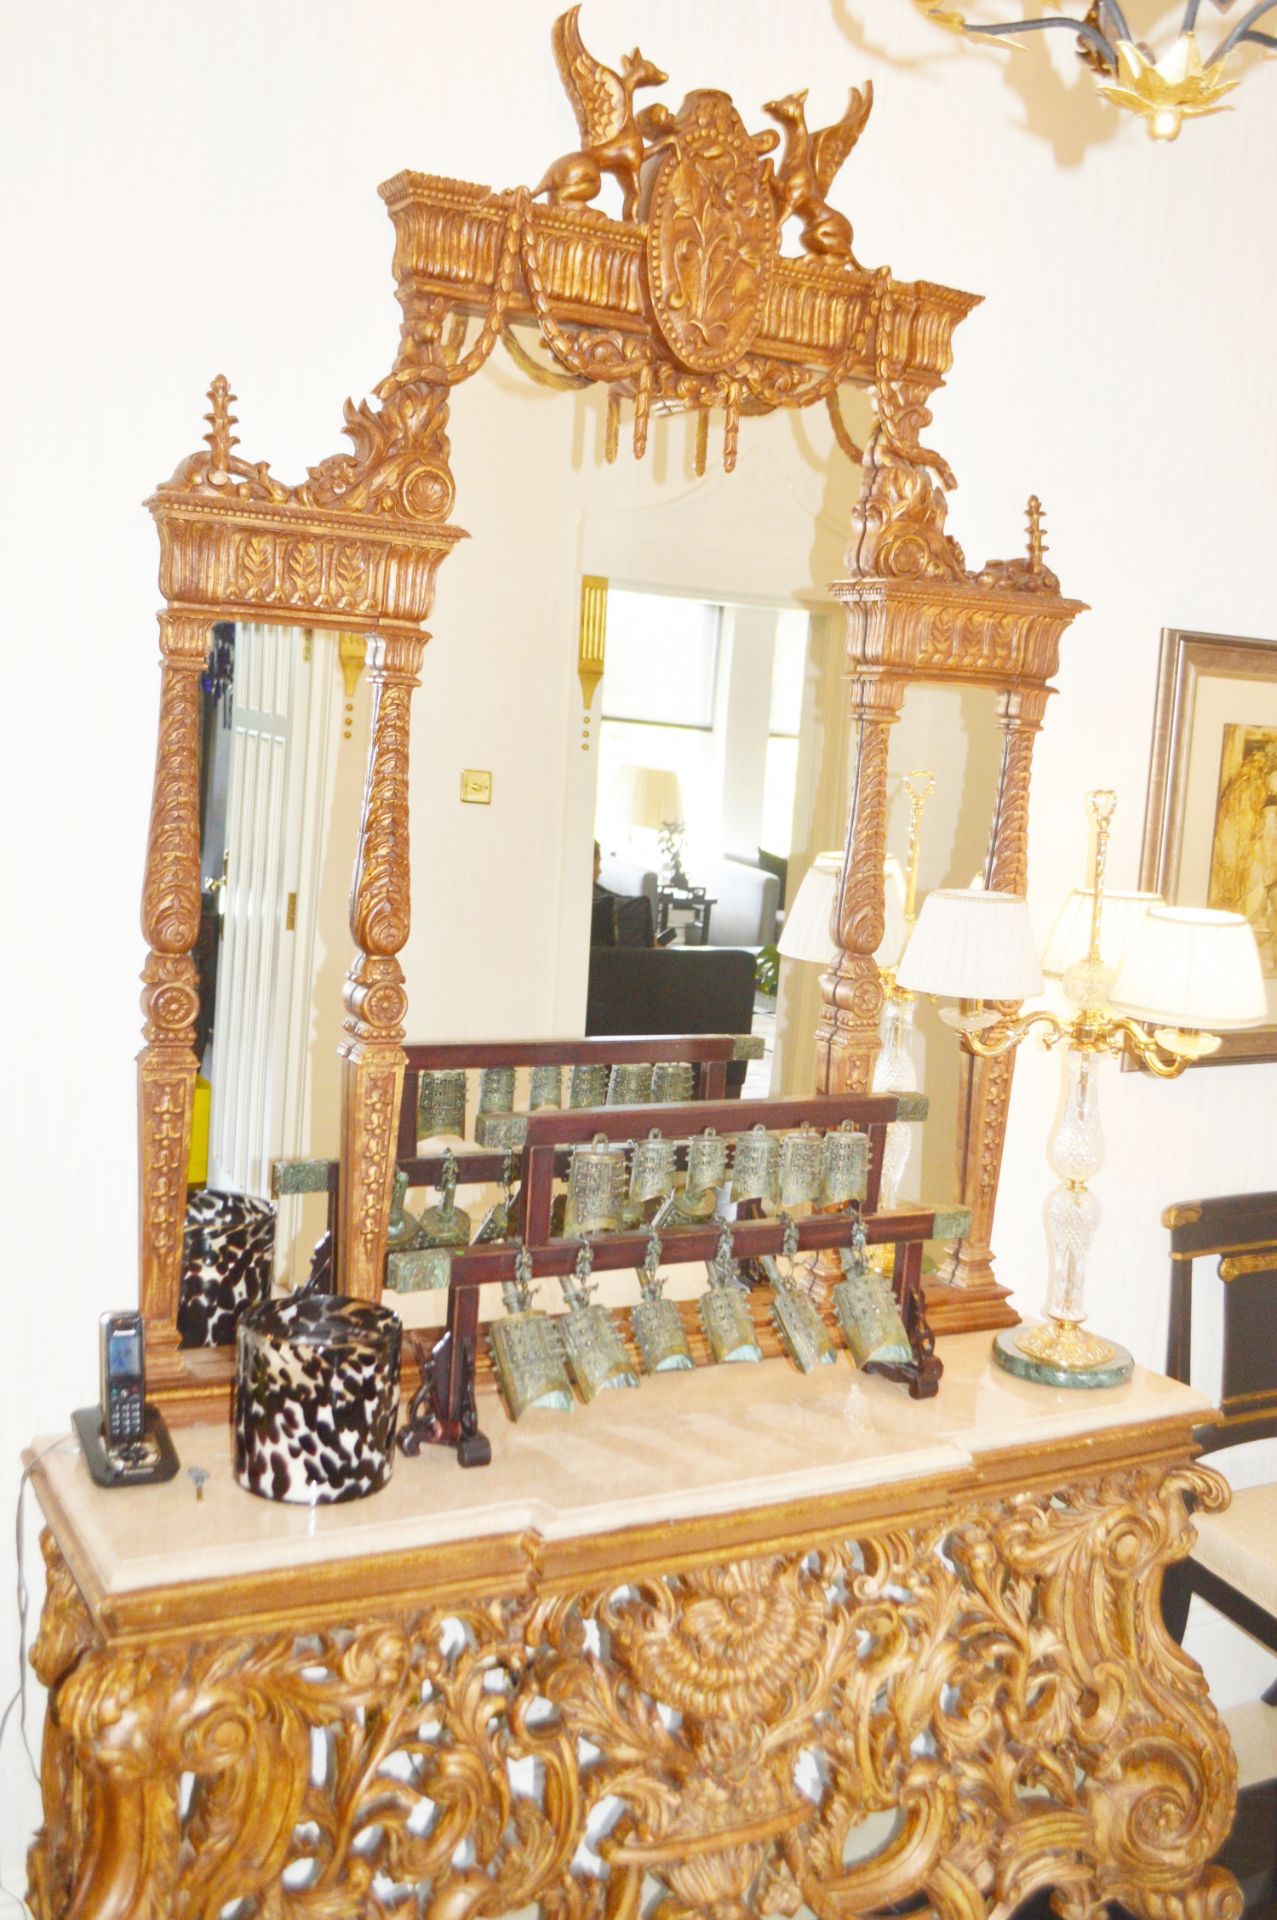 1 x Bespoke Ornate Hand-crafted Console Display Table With Matching Mirror - To Be Removed From An - Image 3 of 6